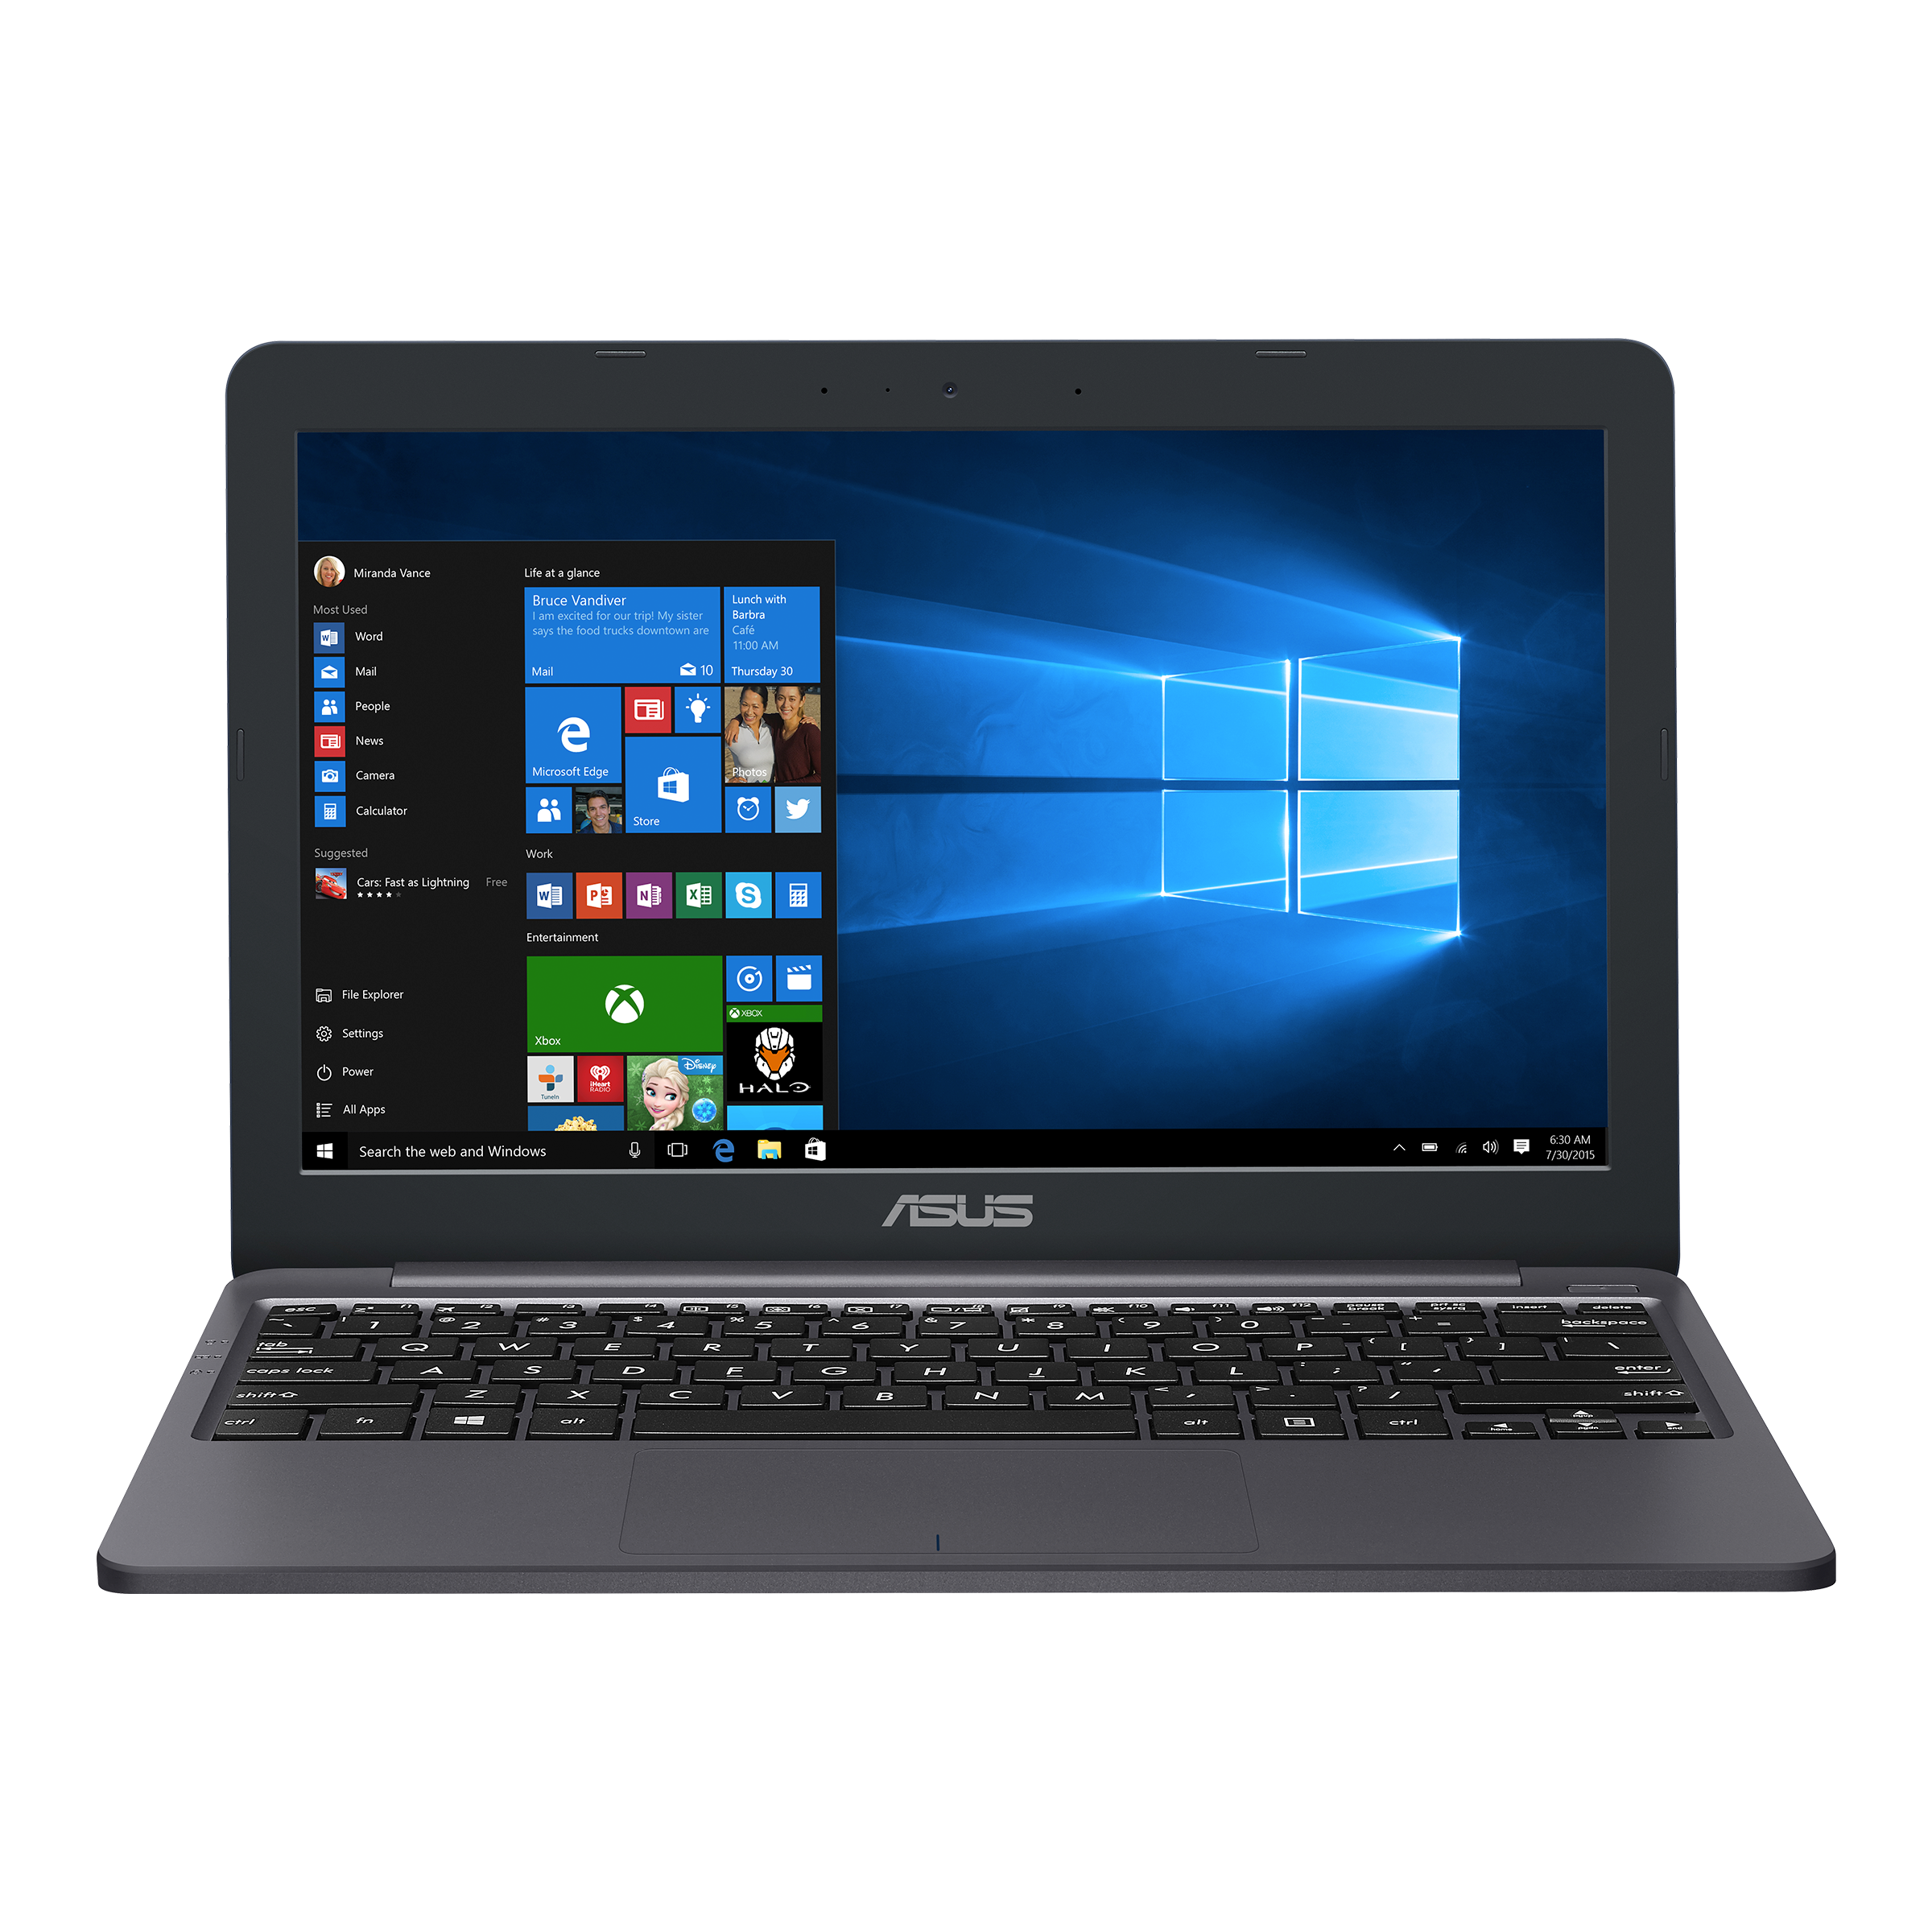 ASUS E203｜Laptops For Home｜ASUS Global